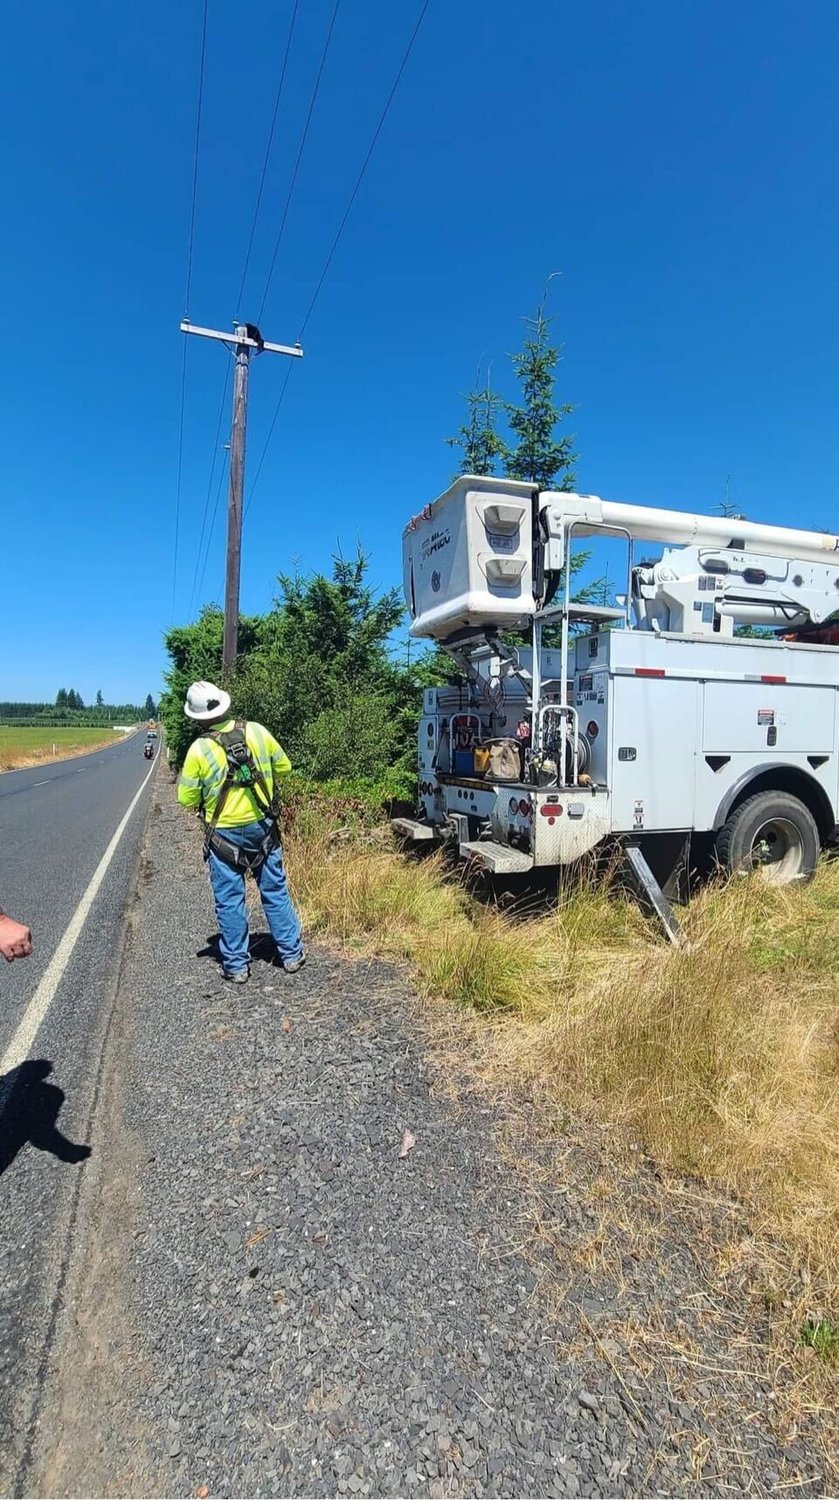 Raven sits on the crossarm of a utility pole west of Chehalis as Lewis County Public Utility District employees prepare to make a rescue attempt.